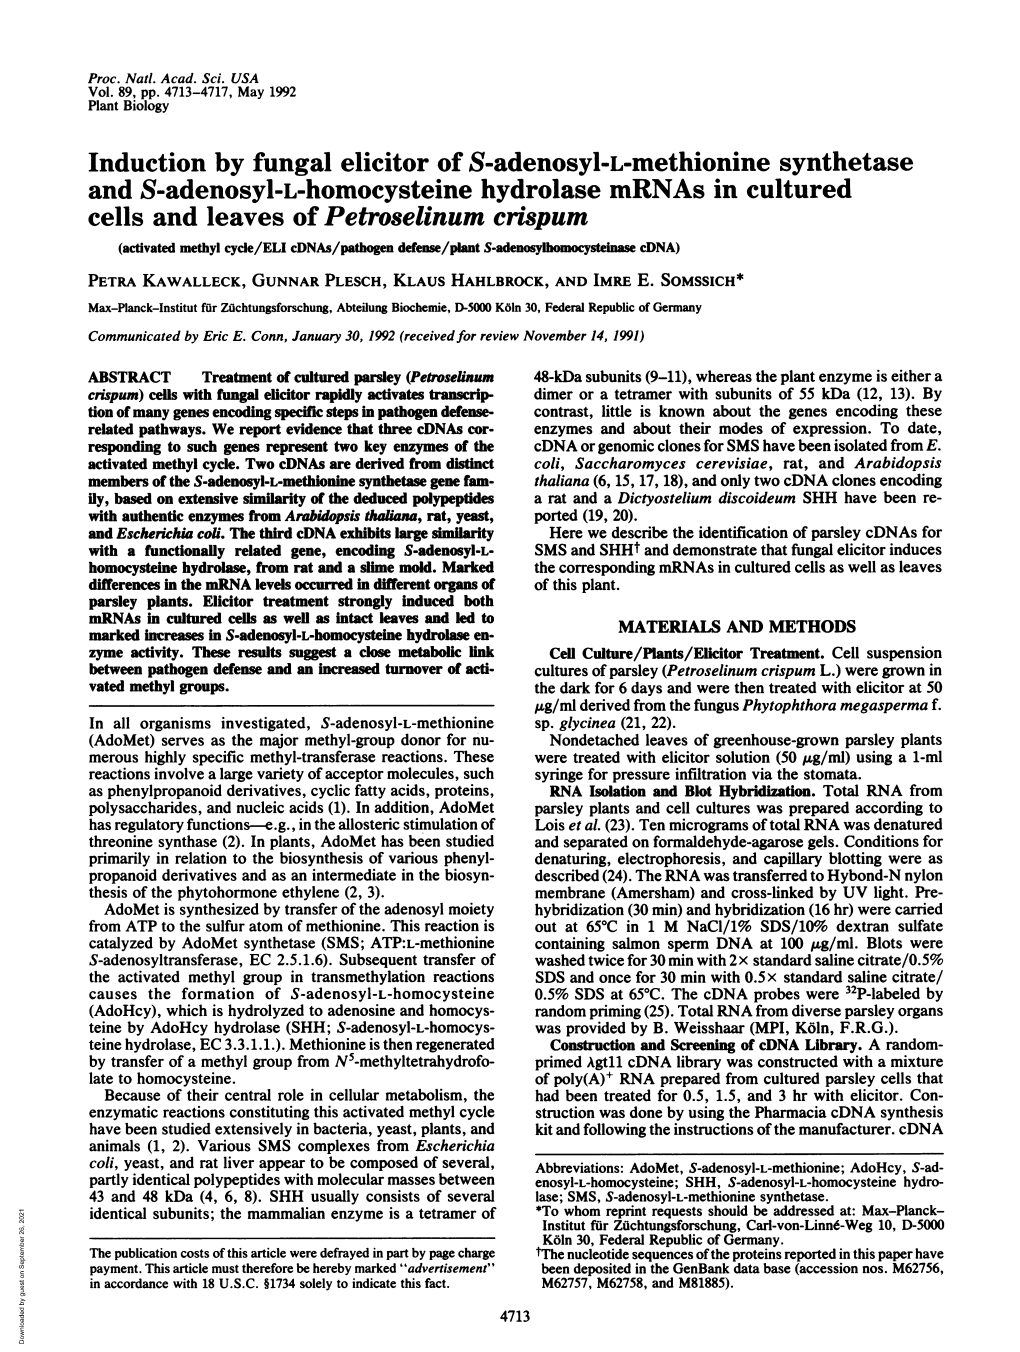 Induction by Fungal Elicitor of S-Adenosyl-L-Methionine